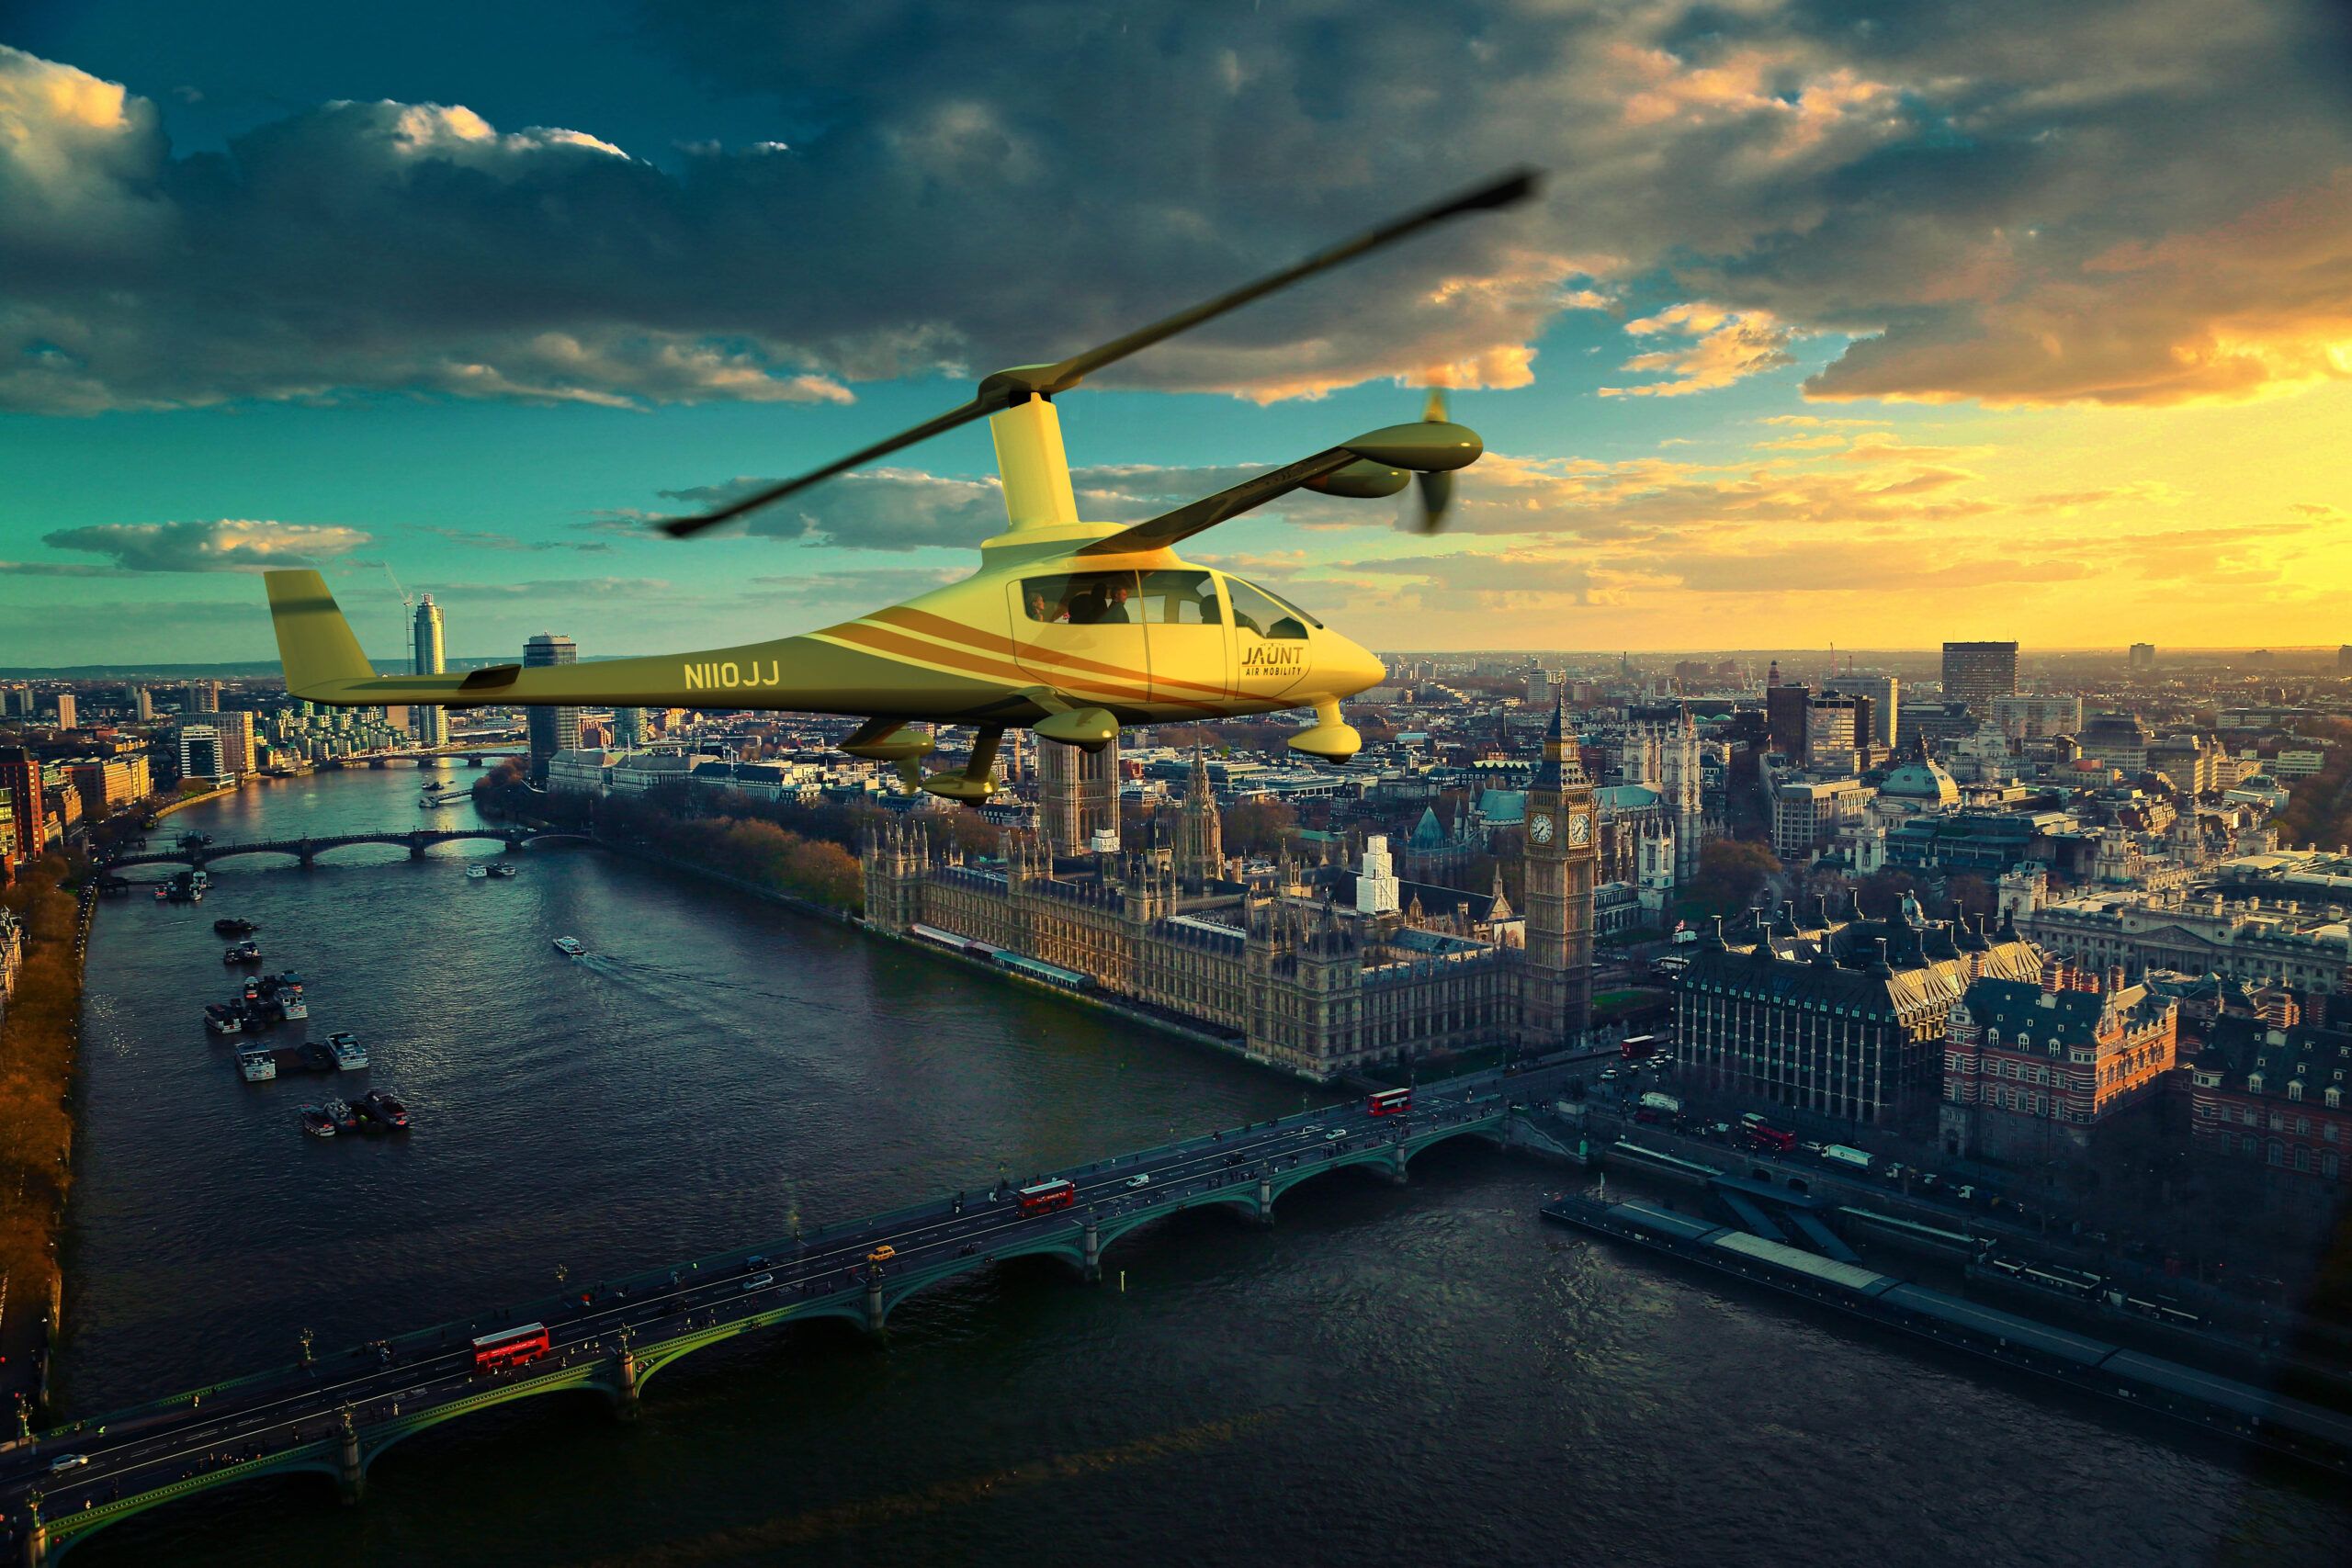 Nothing virtual about the success of the Reality H® helicopter